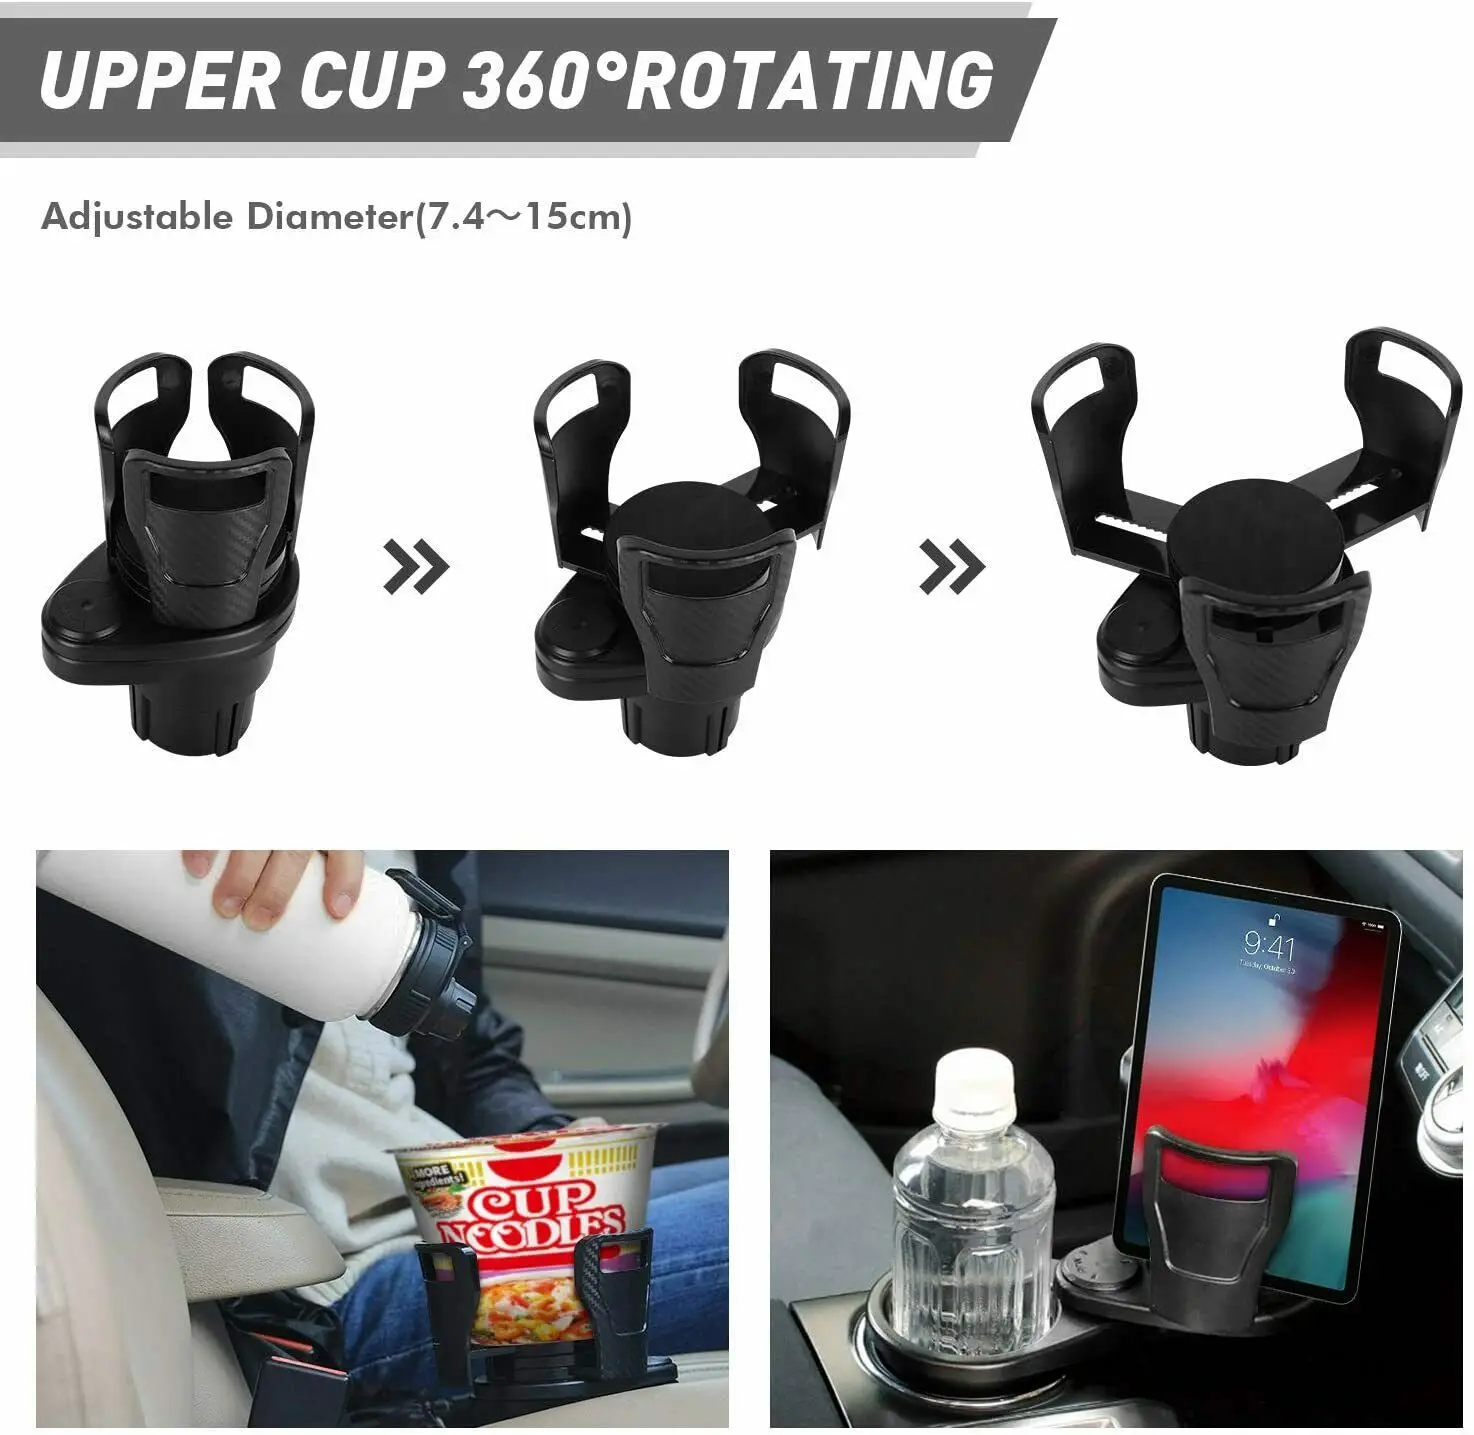 2 in 1 Multifunctional Car Cup Holder 360° Rotating Adjustable Car Cup  Holder Expander Adapter Base Tray for Snack Bottles Cups - AliExpress